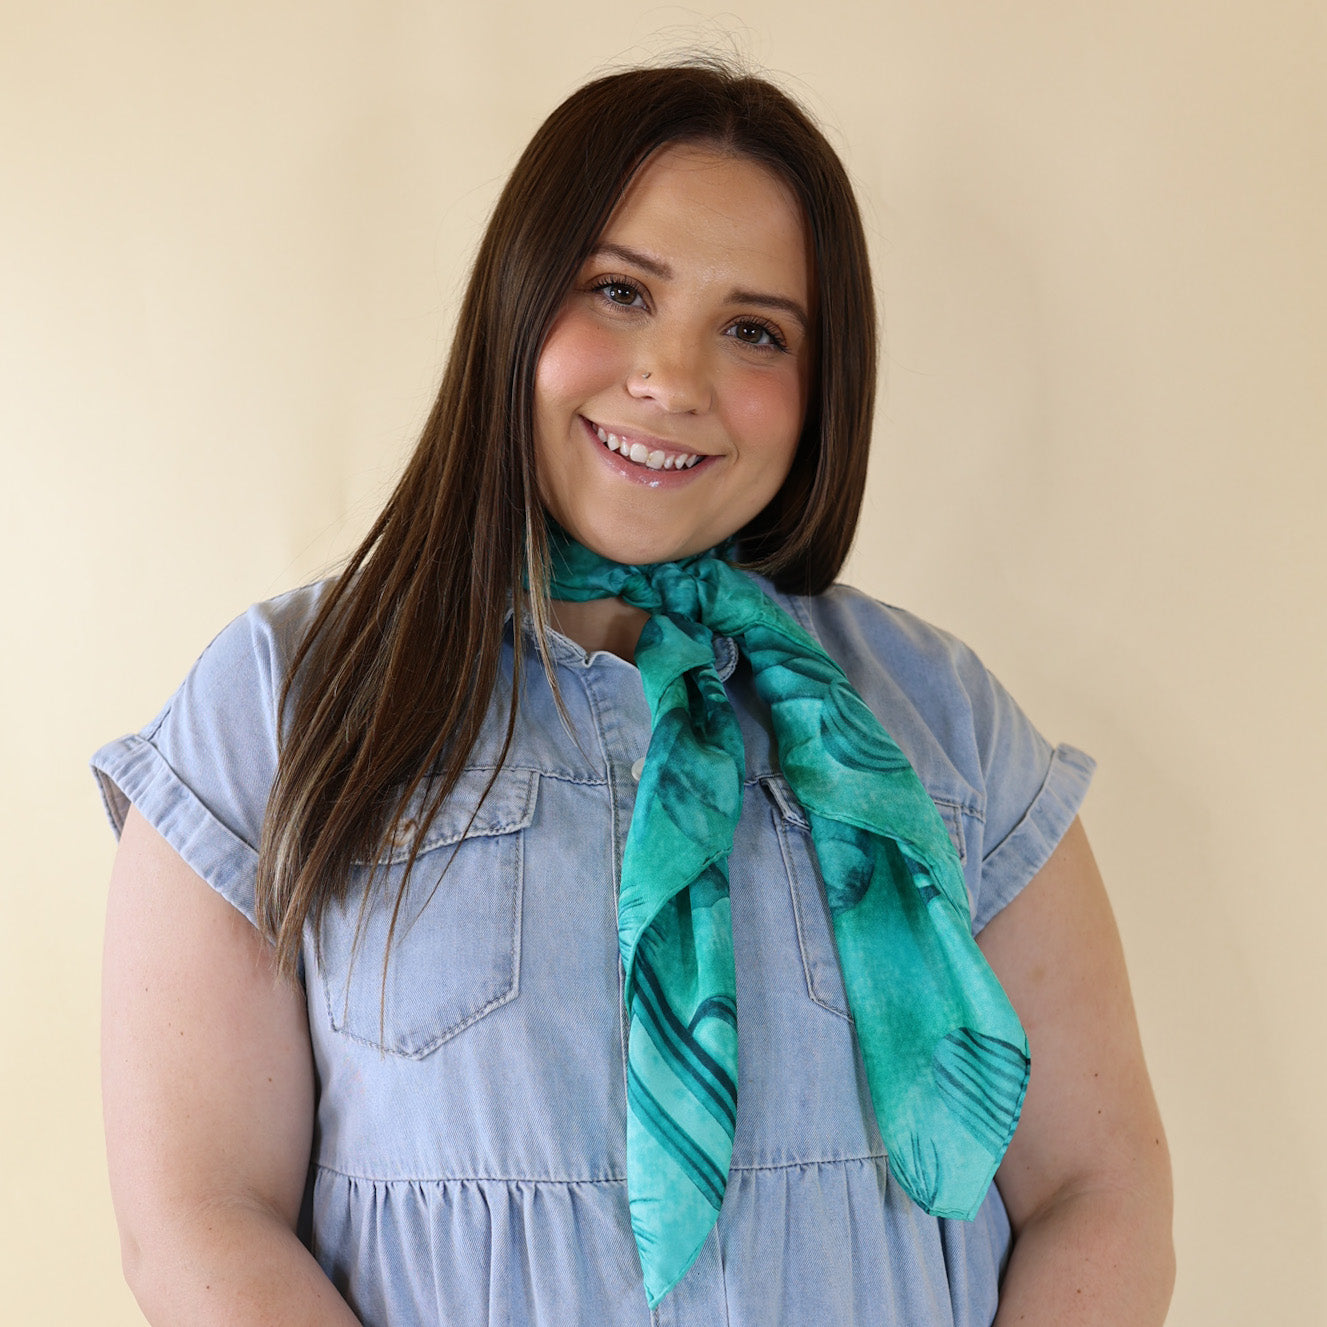 Brunette model is pictured wearing a denim button up top and a teal, cacti printed scarf tied around her neck. She is pictured in front of a beige background. 